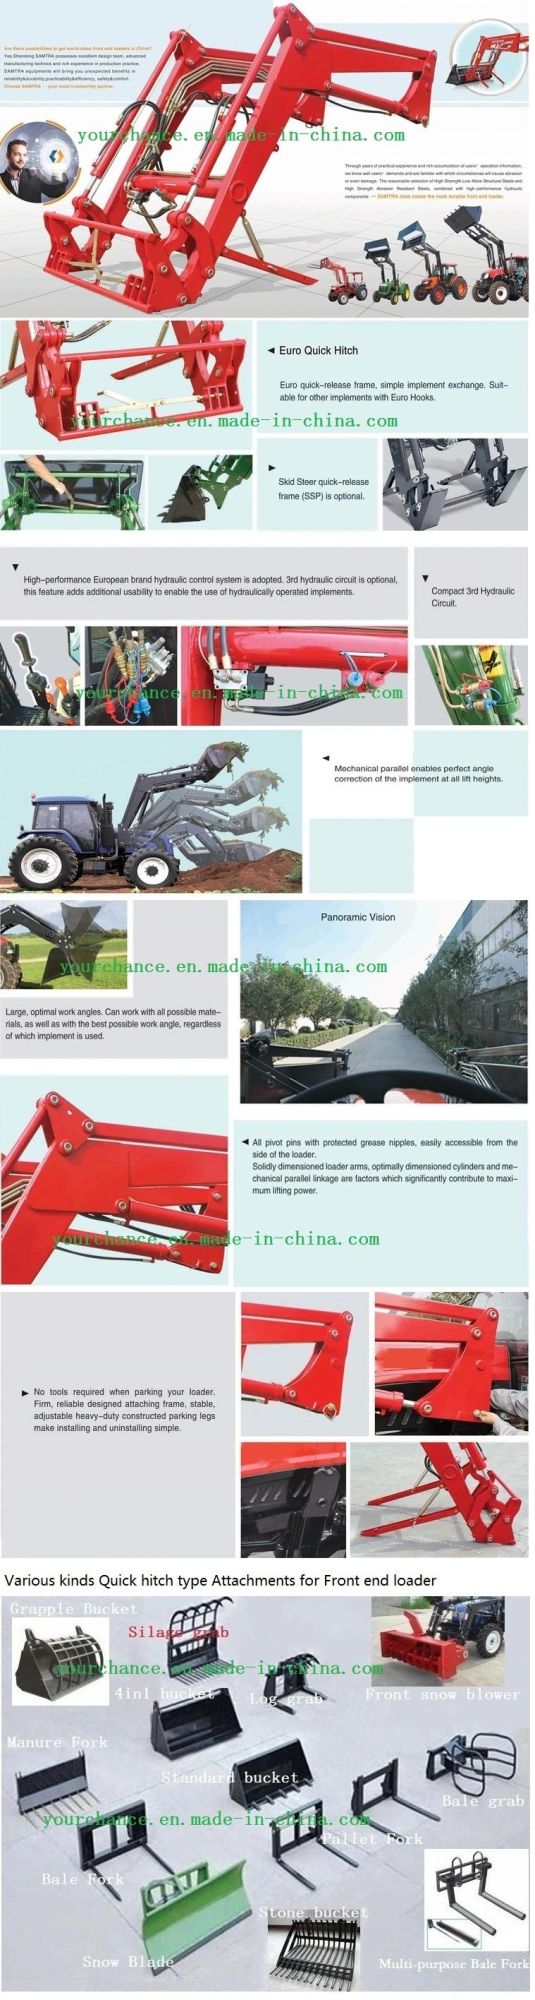 Europe Hot Sale Ce Certificate Tz16D Heavy Duty Big Front End Loader for 140-180HP Tractor